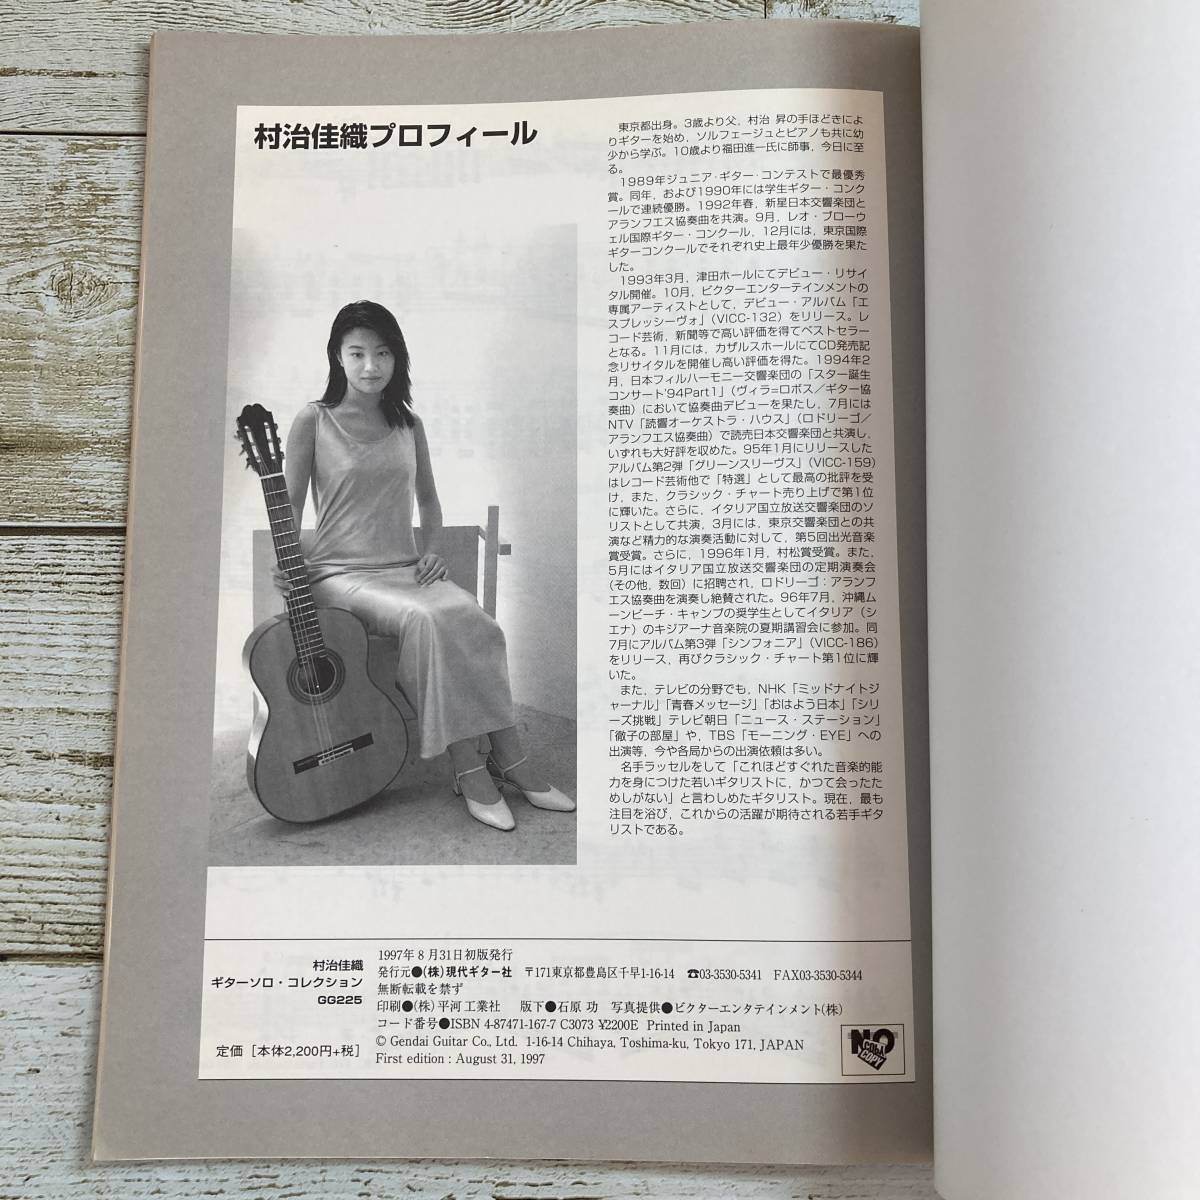 SA06-194 #... woven guitar Solo * collection / present-day guitar company # KAORI MURAJI GUITAR SOLO COLLECTION # breaking traces equipped [ including in a package un- possible ]